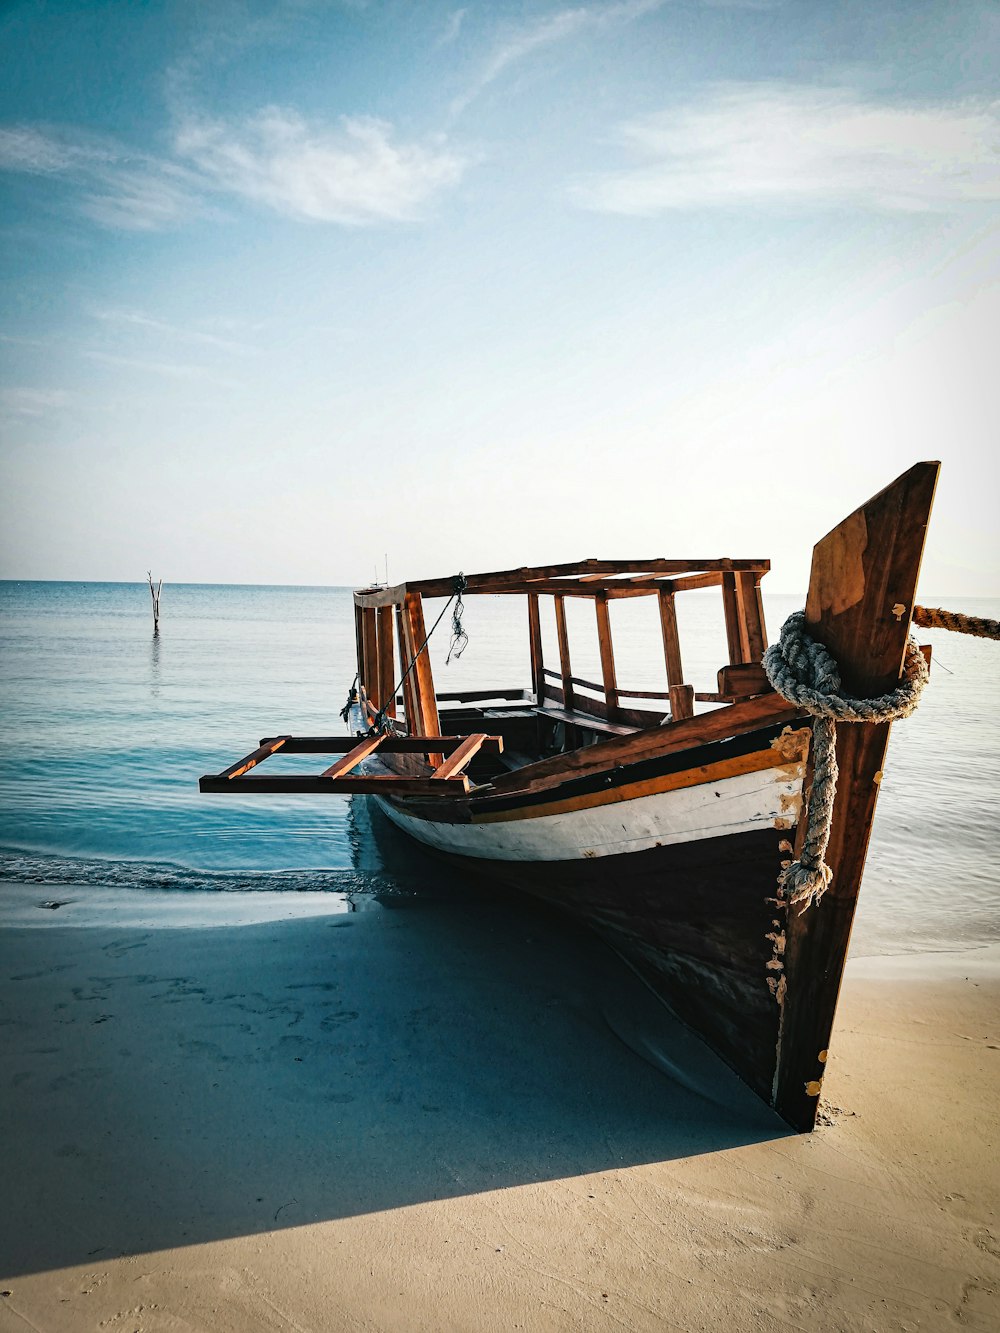 brown wooden boat on sea shore during daytime